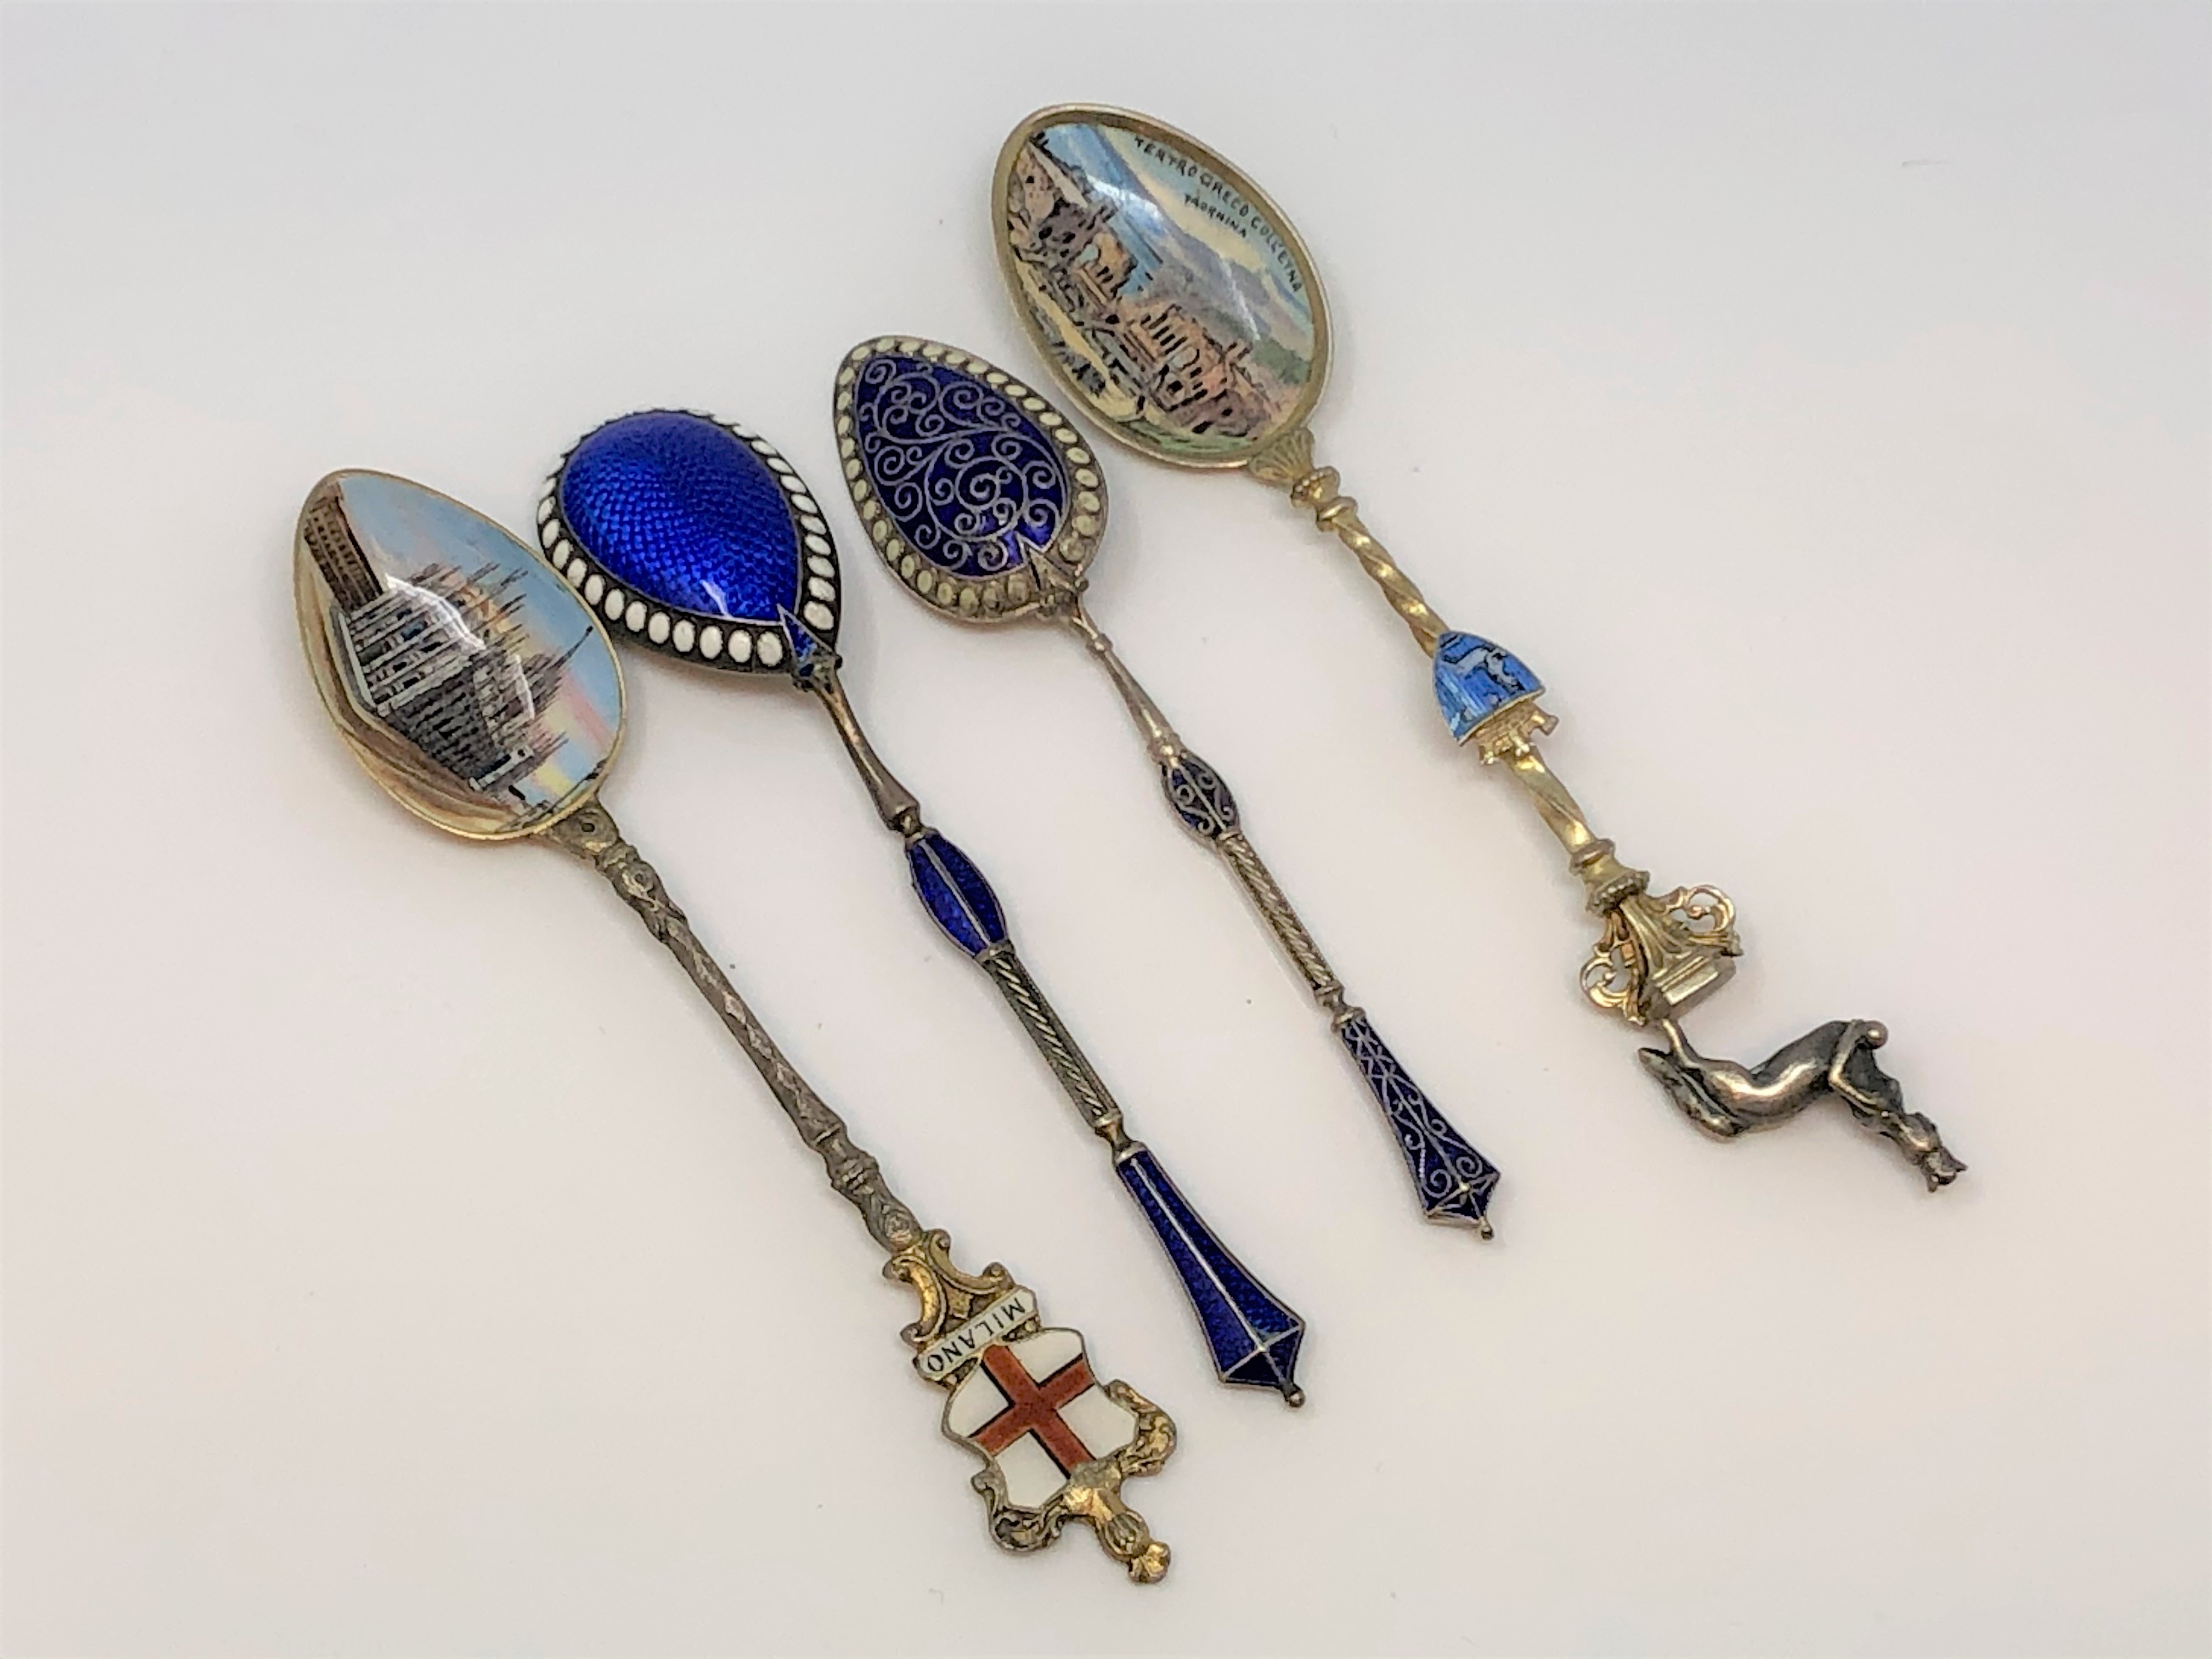 Four ornate silver and enamel spoons.